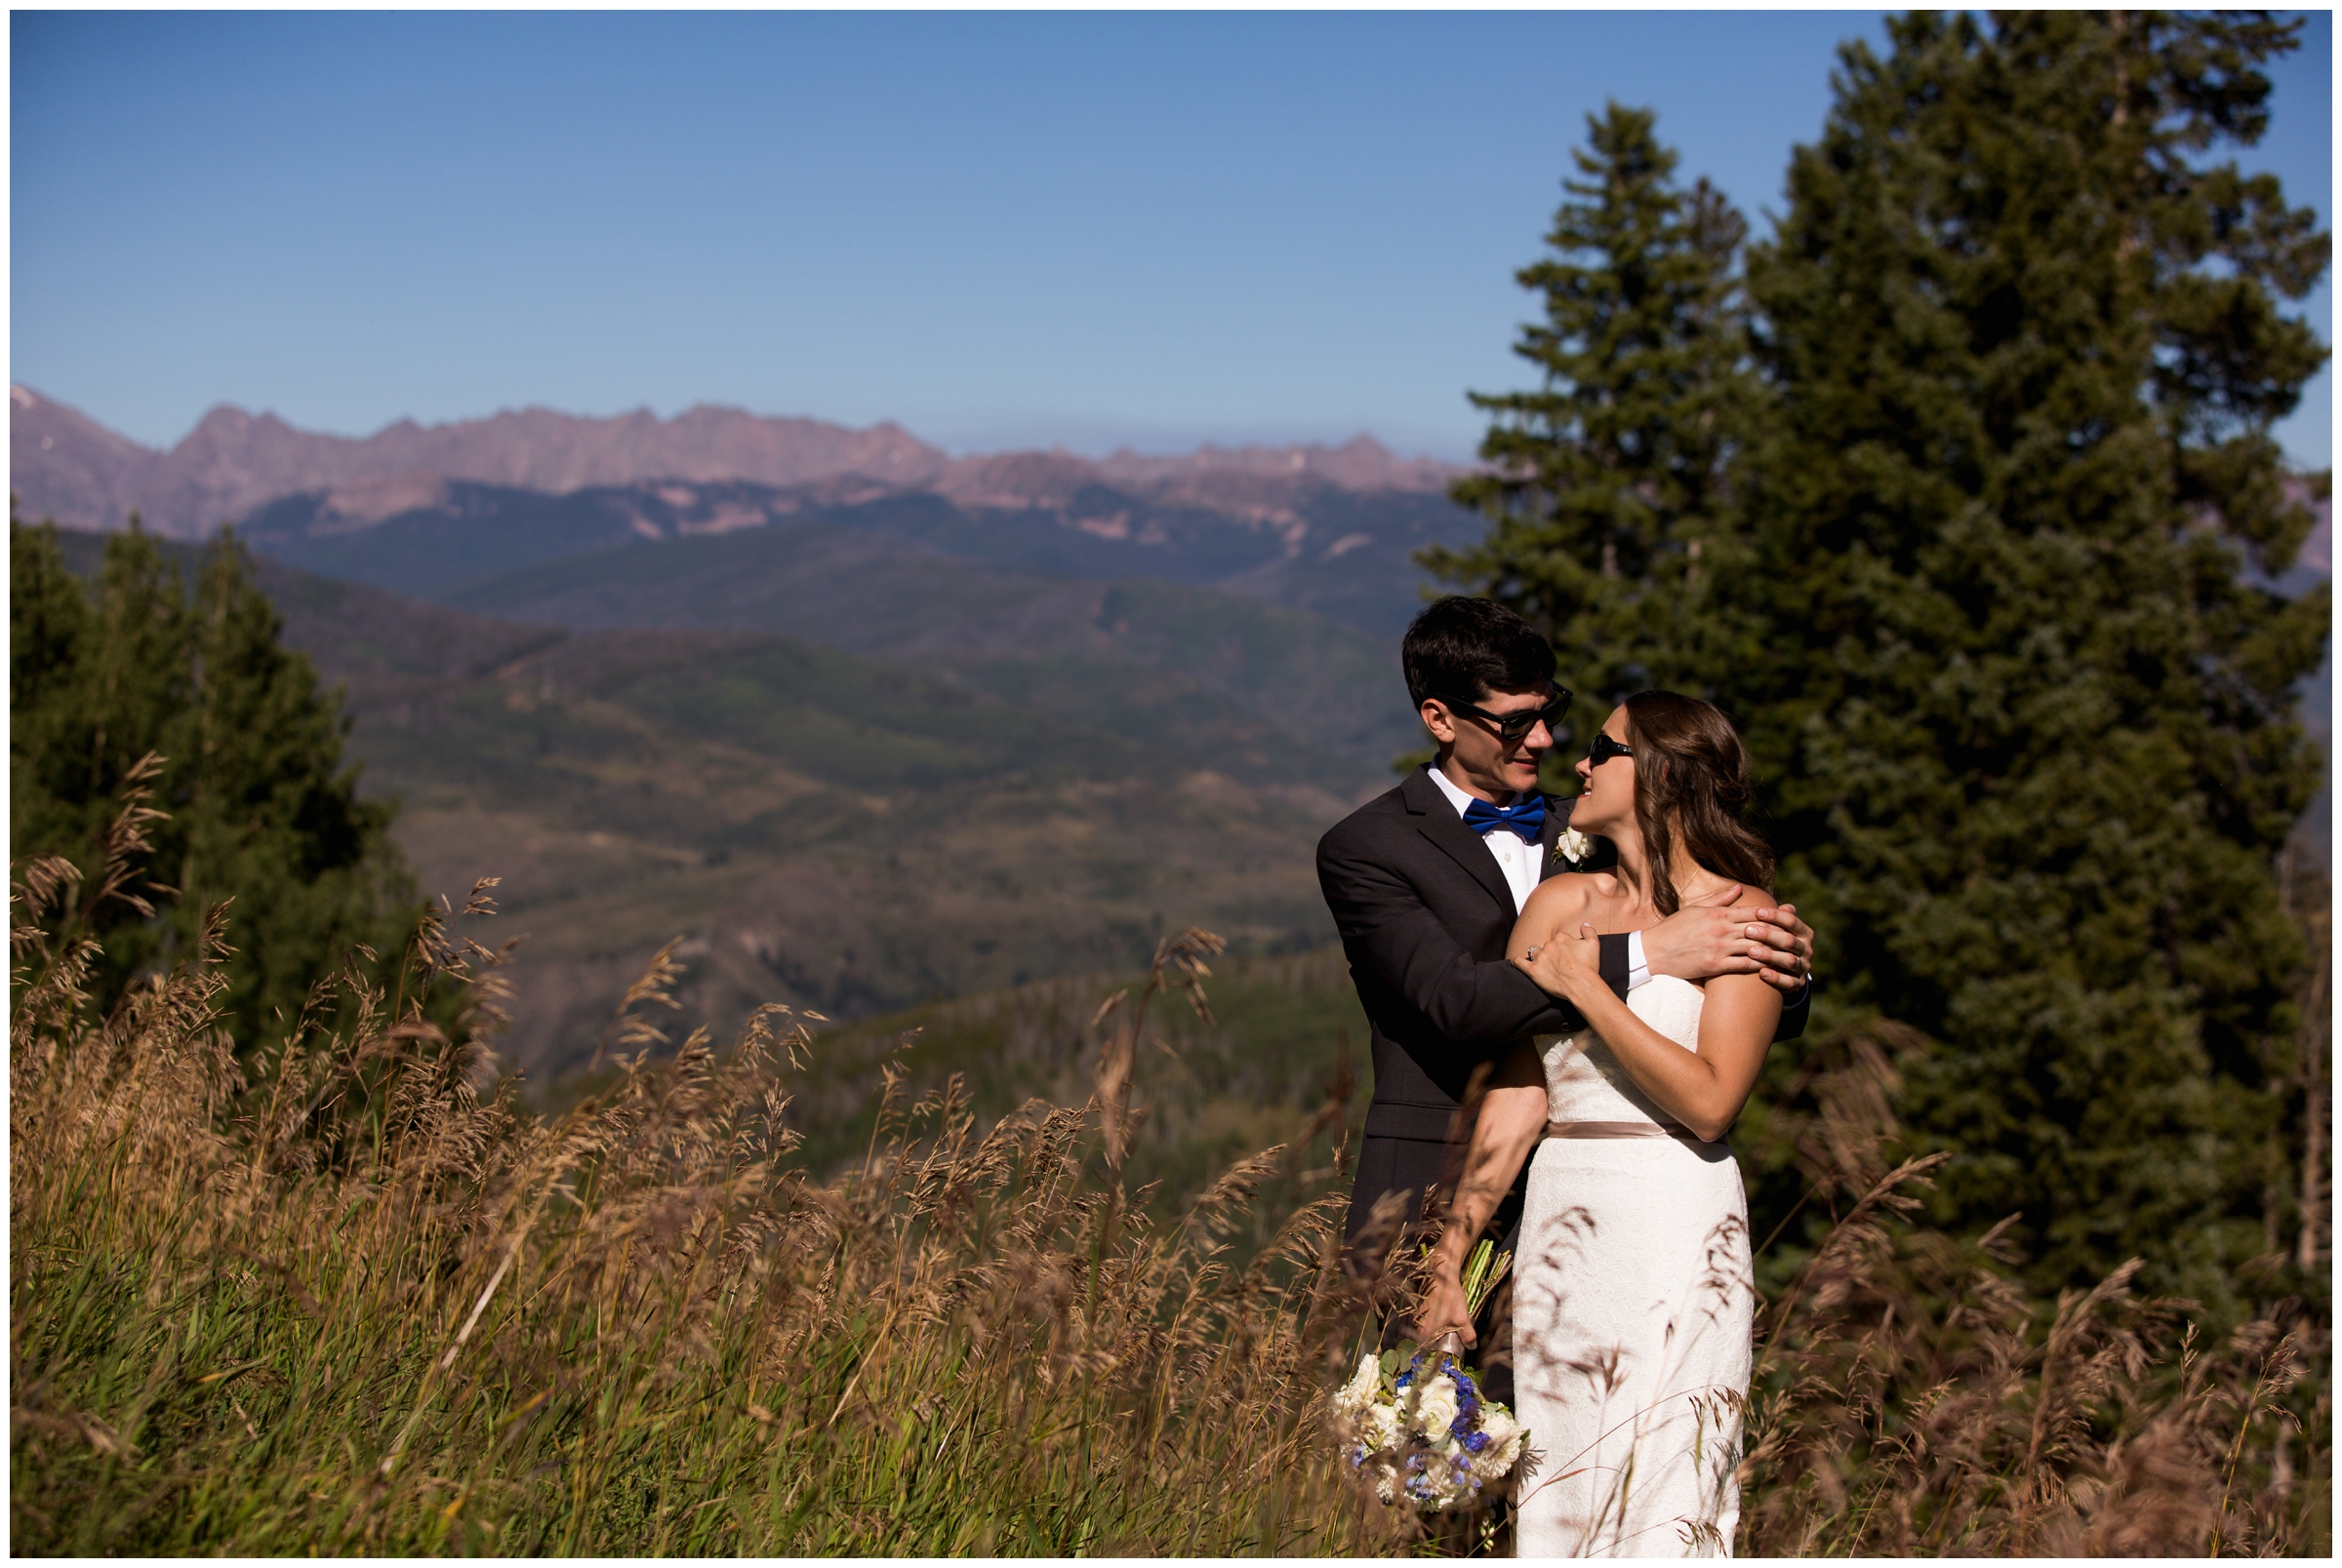 bride and groom in sunglasses during Colorado mountain wedding 